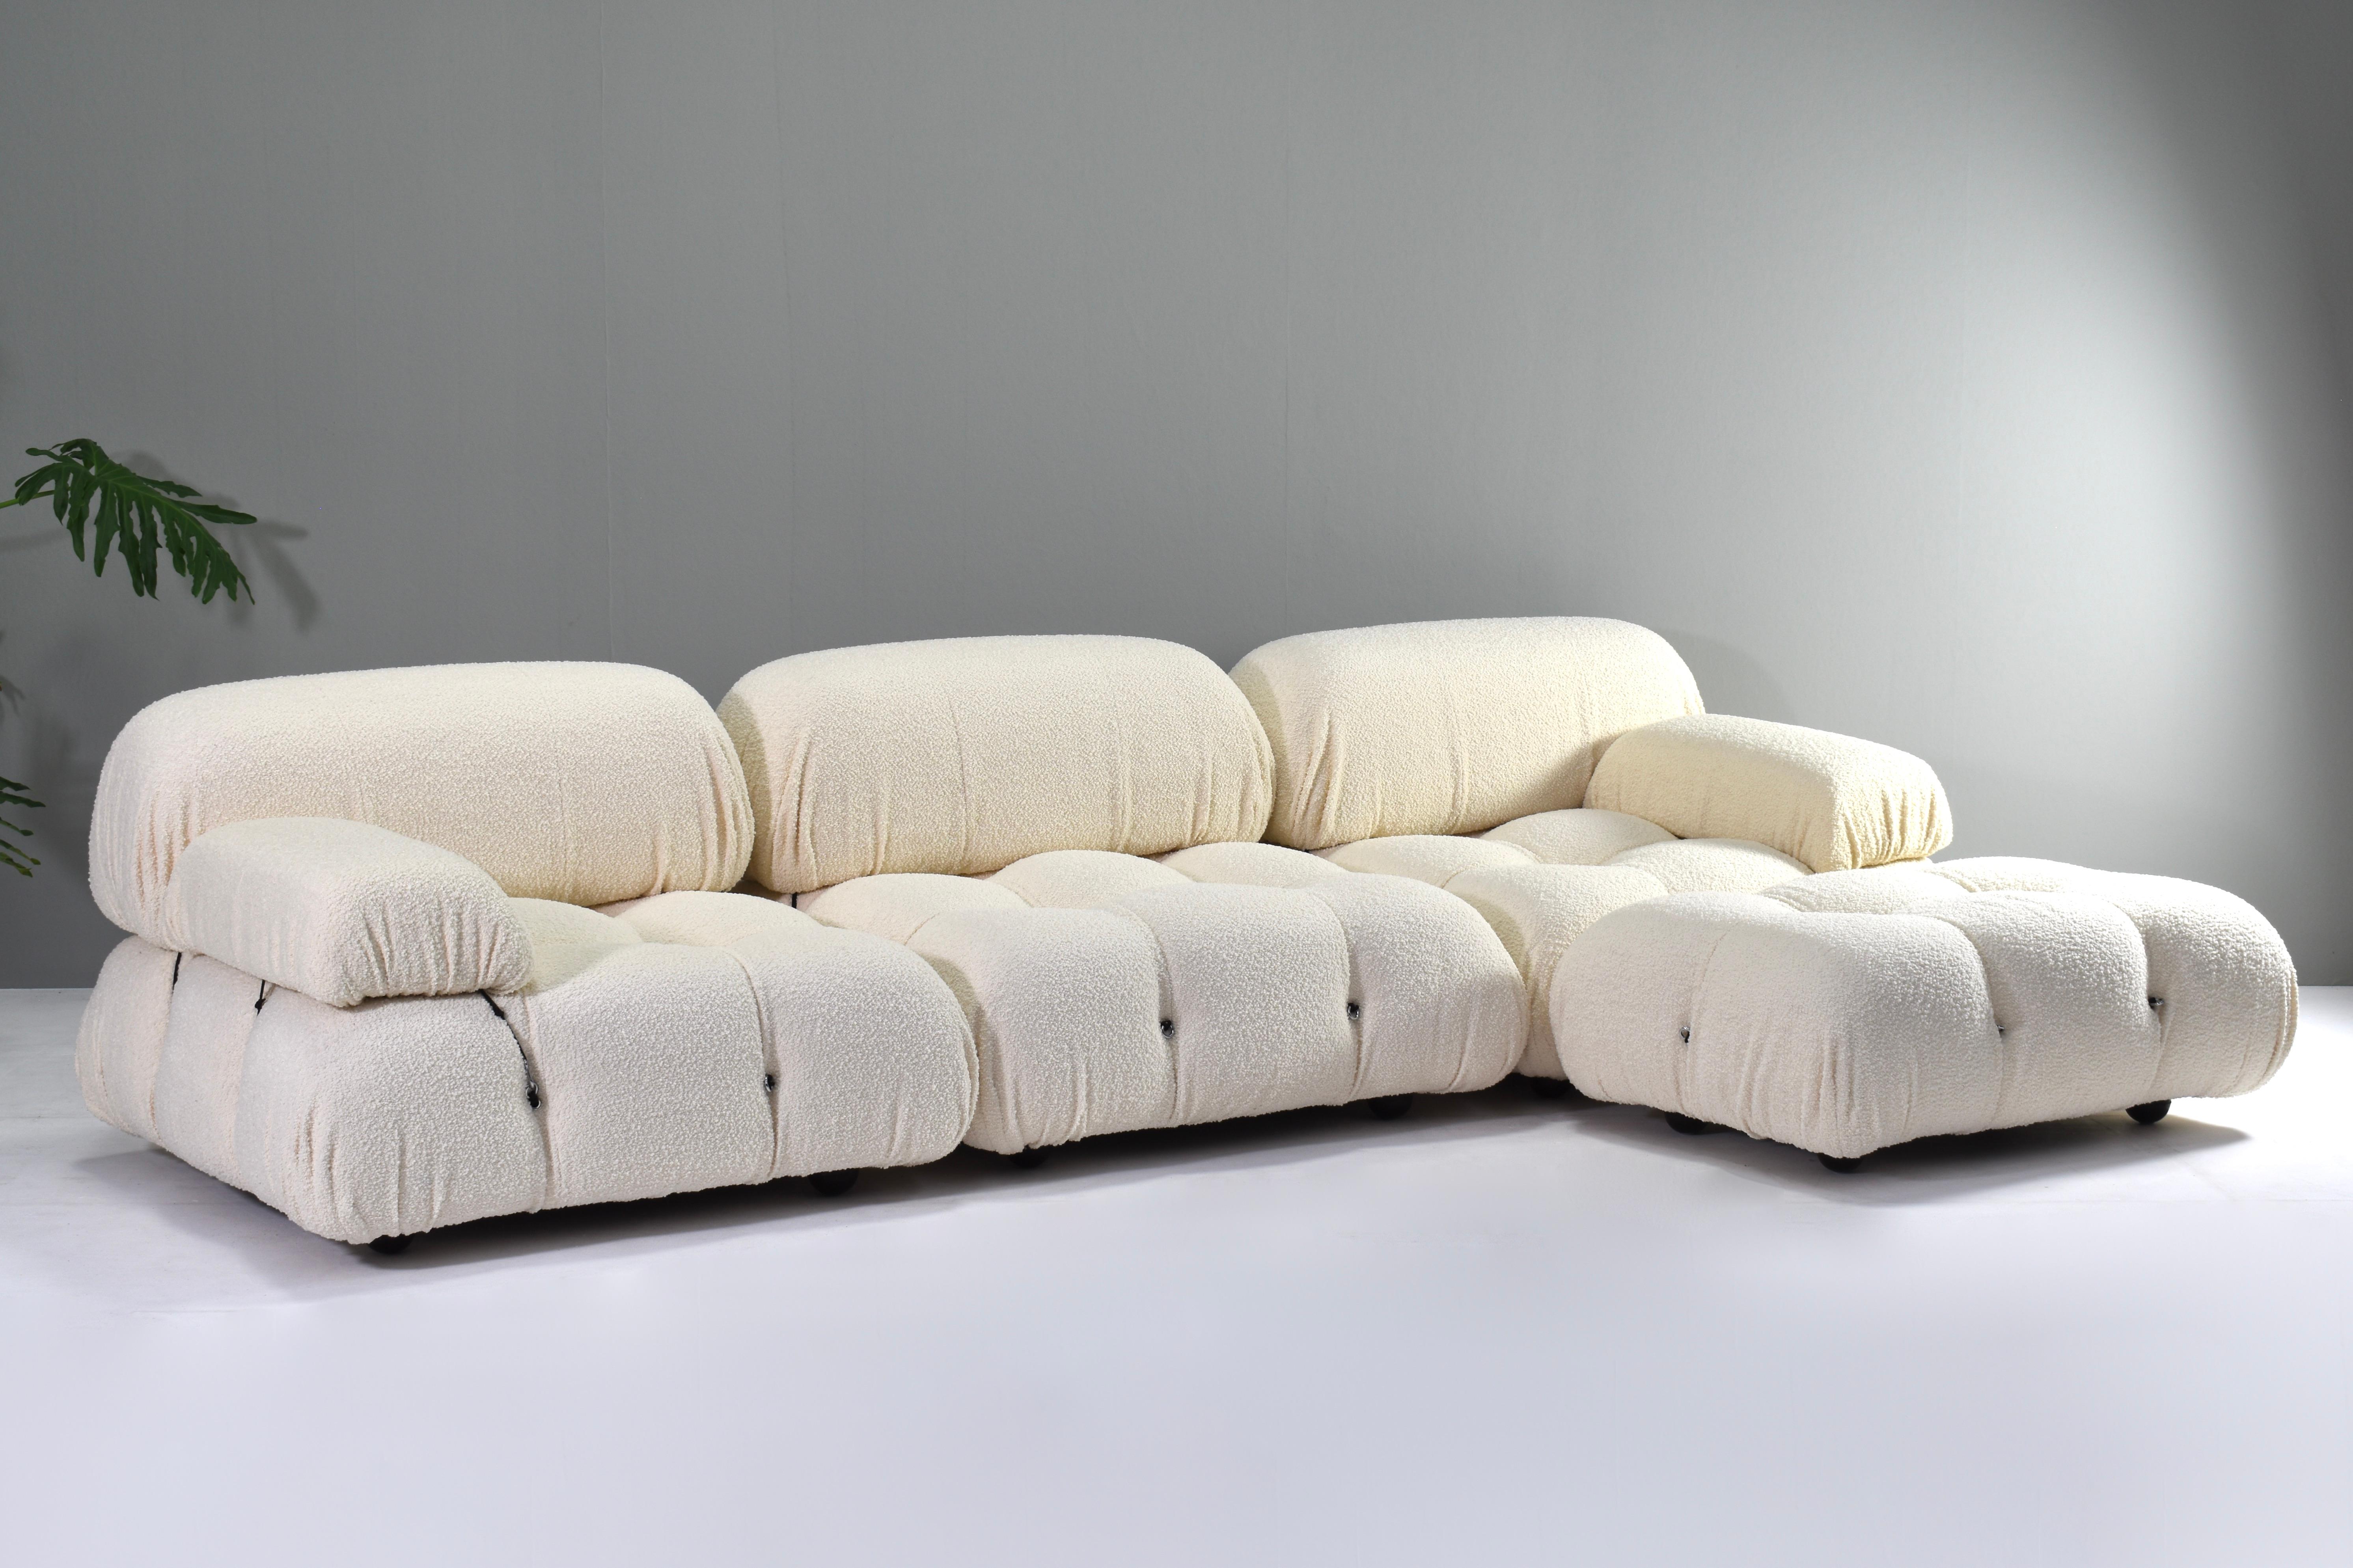 Camaleonda sofa by Mario Bellini for B&B Italia, circa 1970s.
The sofa features four seat elements with three back-rests and two arm-rests. The three Scacci (Italian for chess) elements are available but not included in this listing. These elements